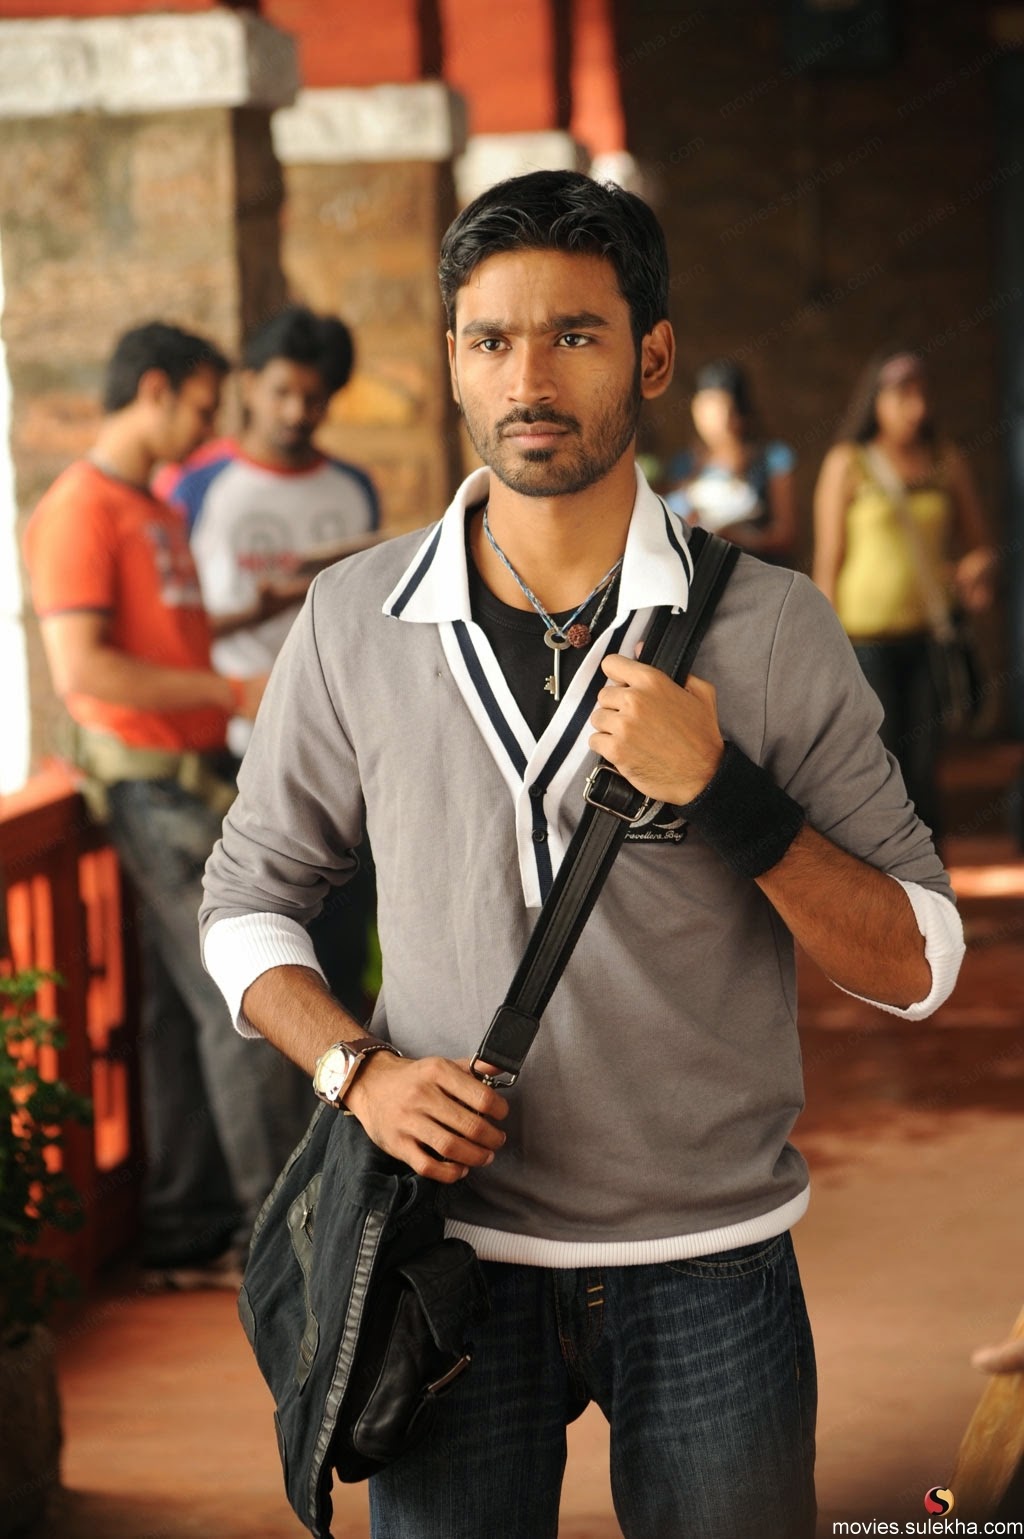 Kutty Dhanush Images Hd , HD Wallpaper & Backgrounds